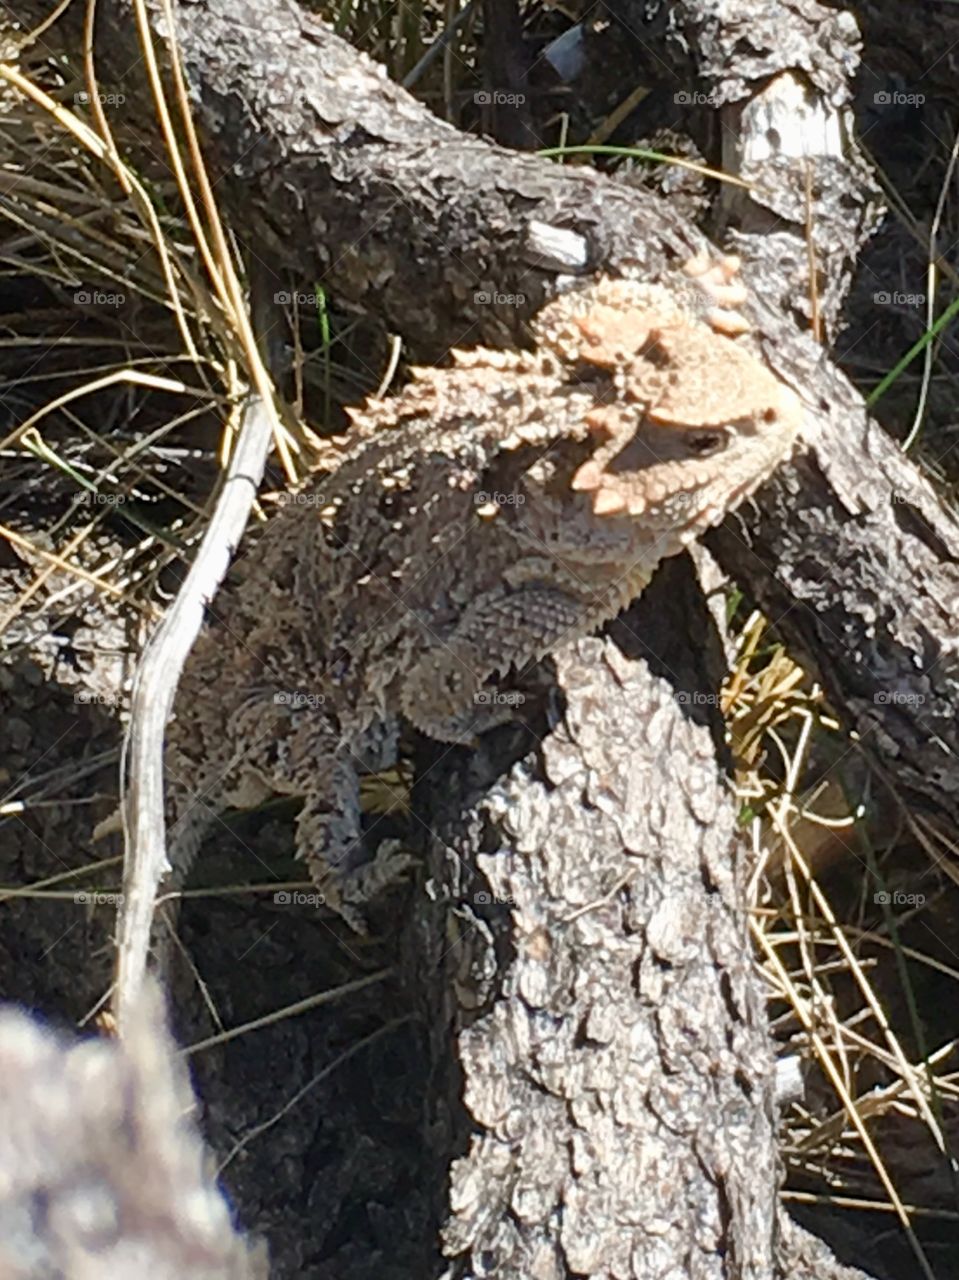 A horned toad lizard surveys his domain from atop a humble perch of a fallen branch.